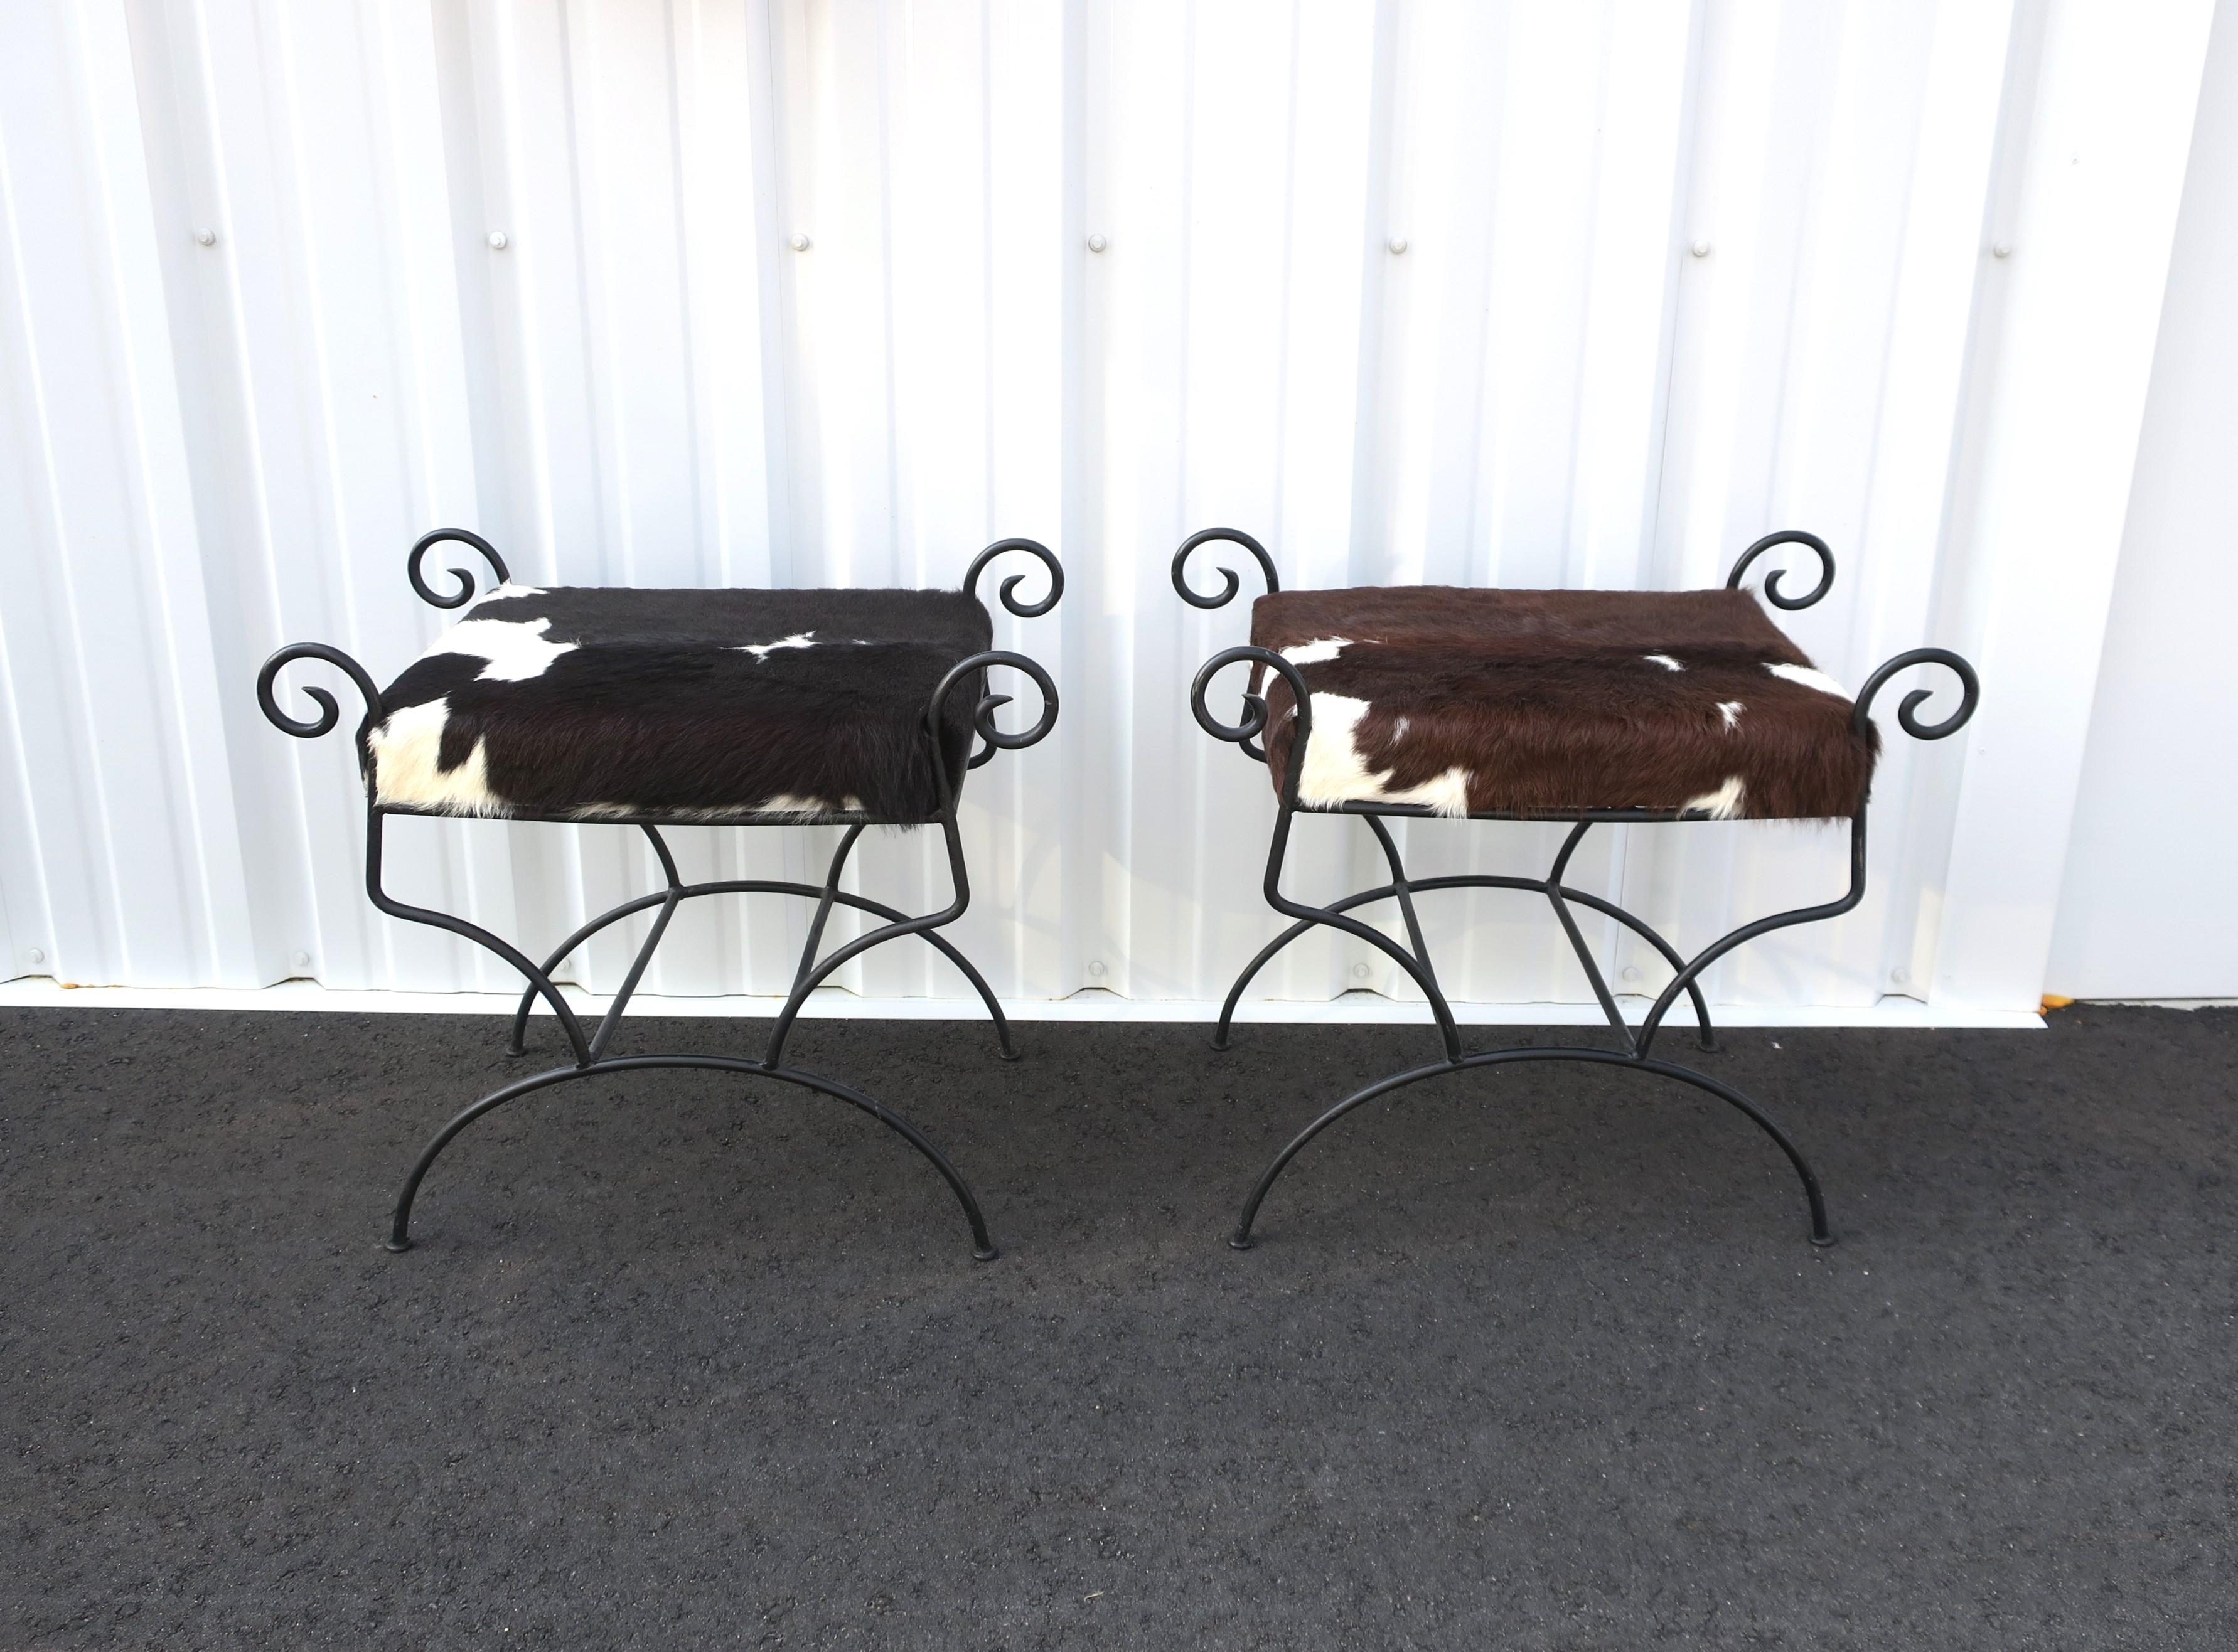 A pair/set of black wrought iron benches or stools with hide seats in the rustic design style, circa late-20th century to early 21st century. Hide seat cushions appear to be newly upholstered. Each of the hide seats are comfortable and firm, one